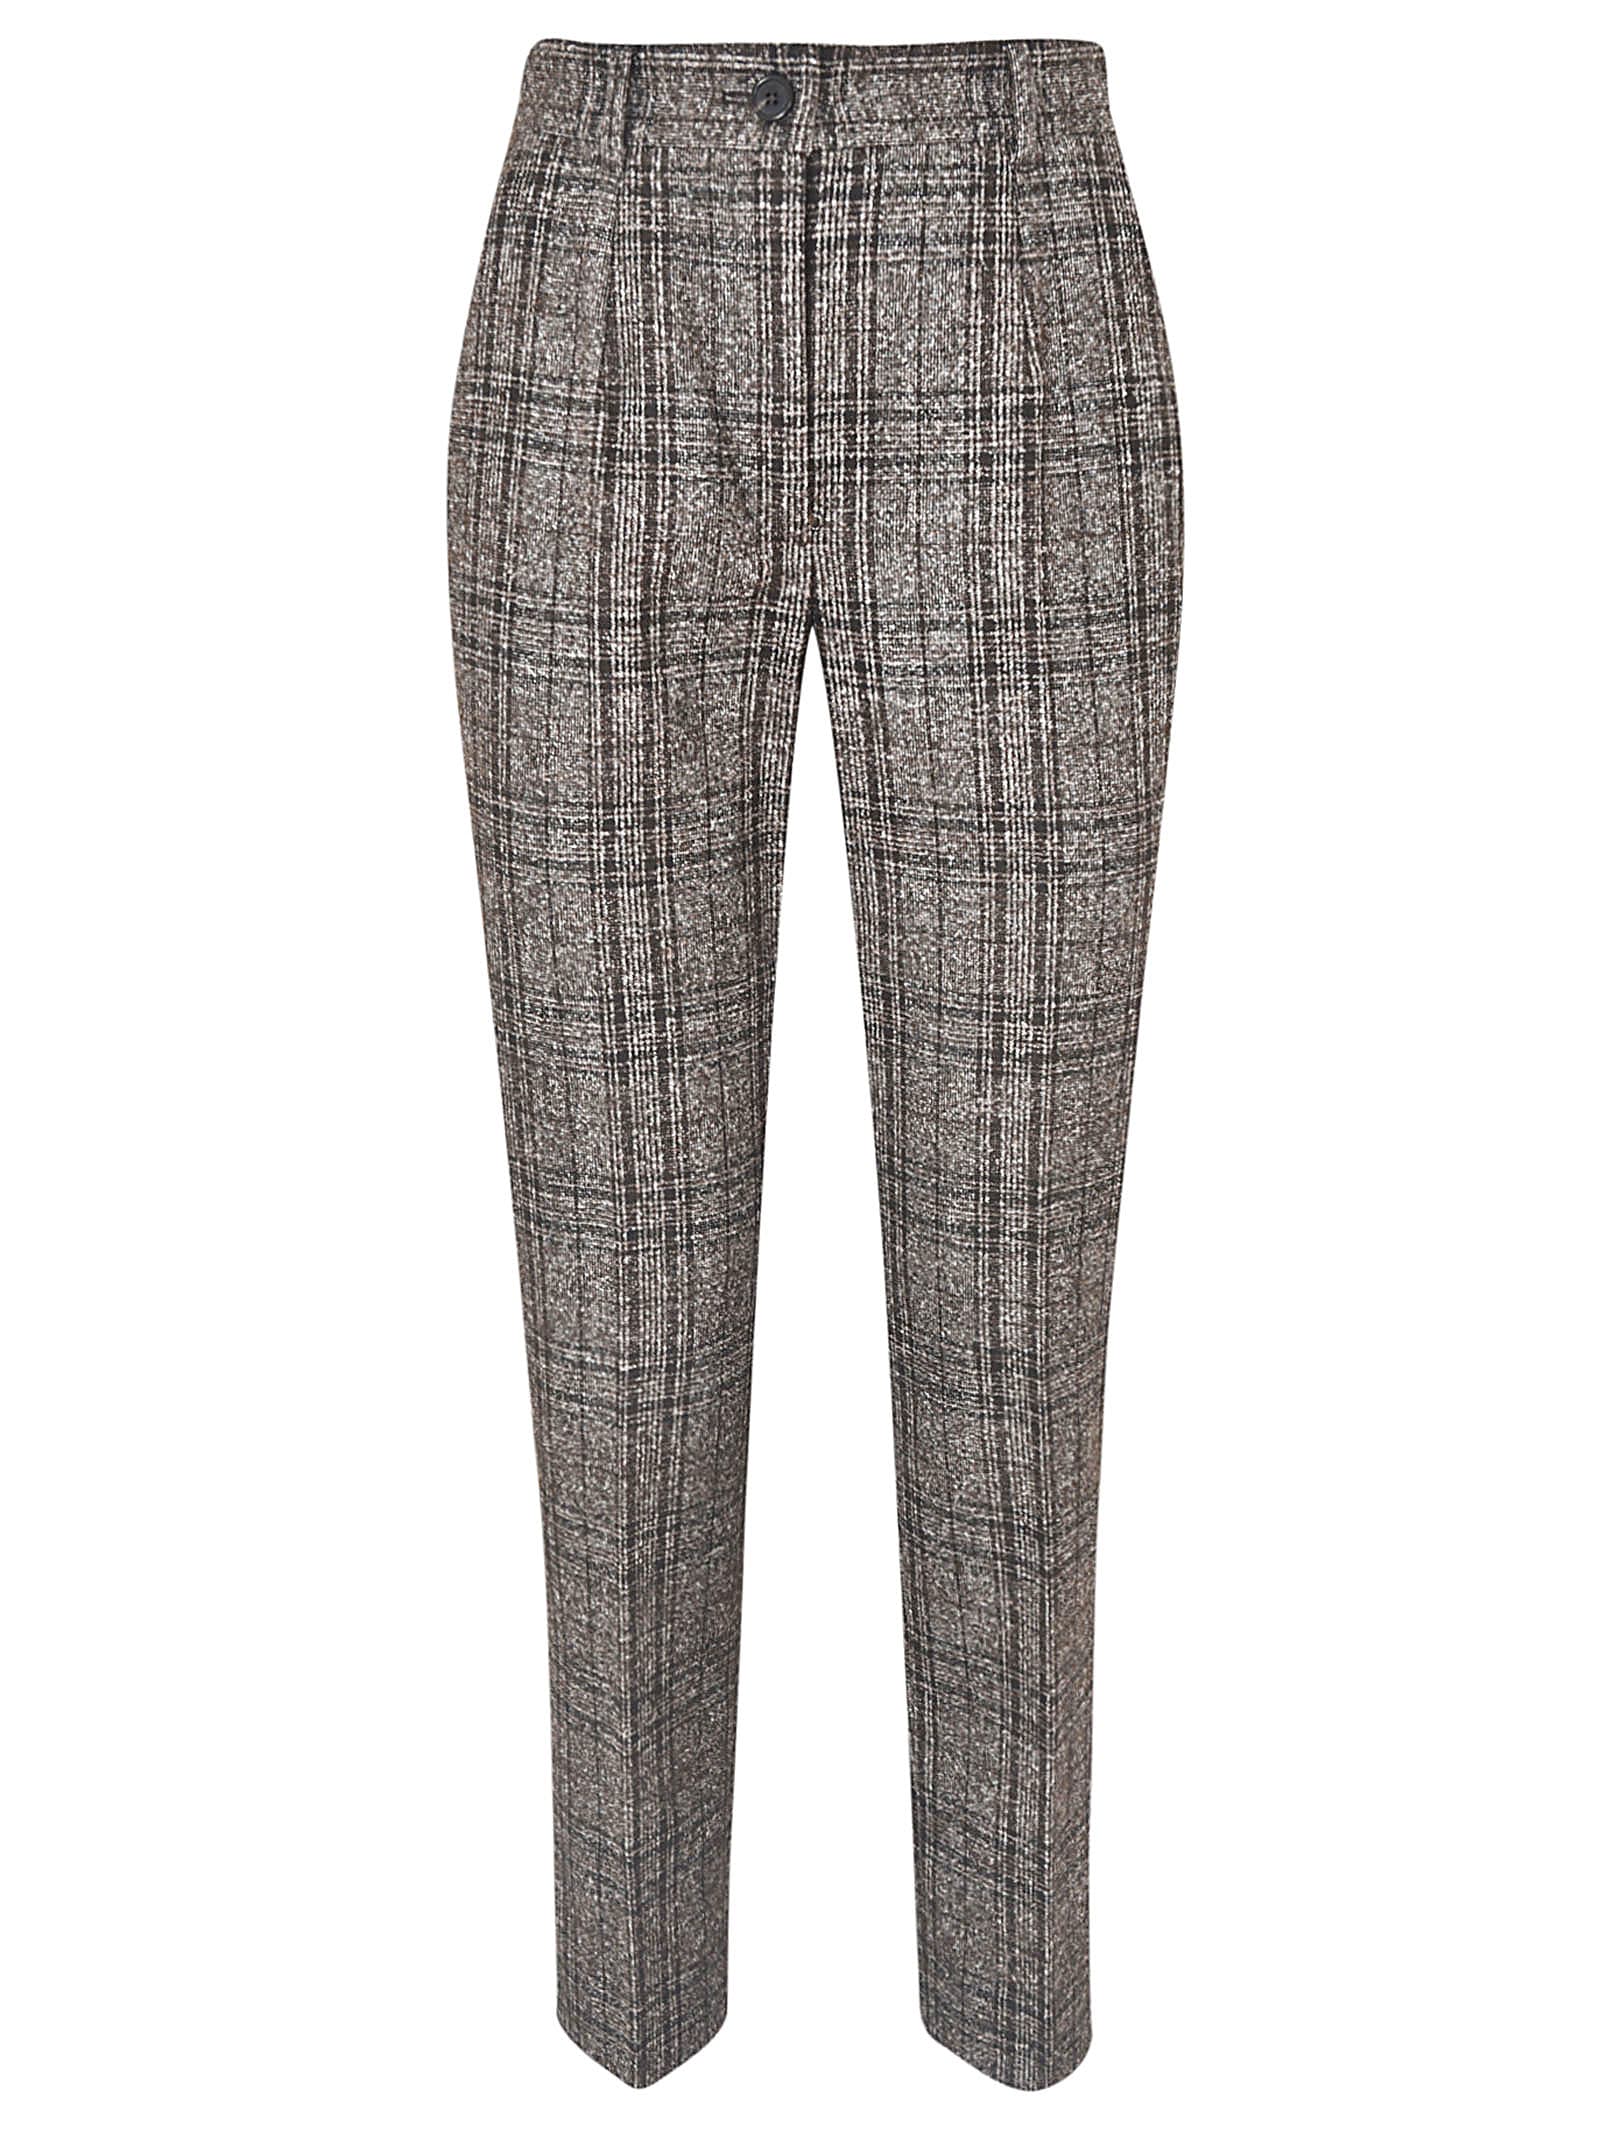 DOLCE & GABBANA CHECK CROPPED TROUSERS,FTAM2T FQMH2 S8101